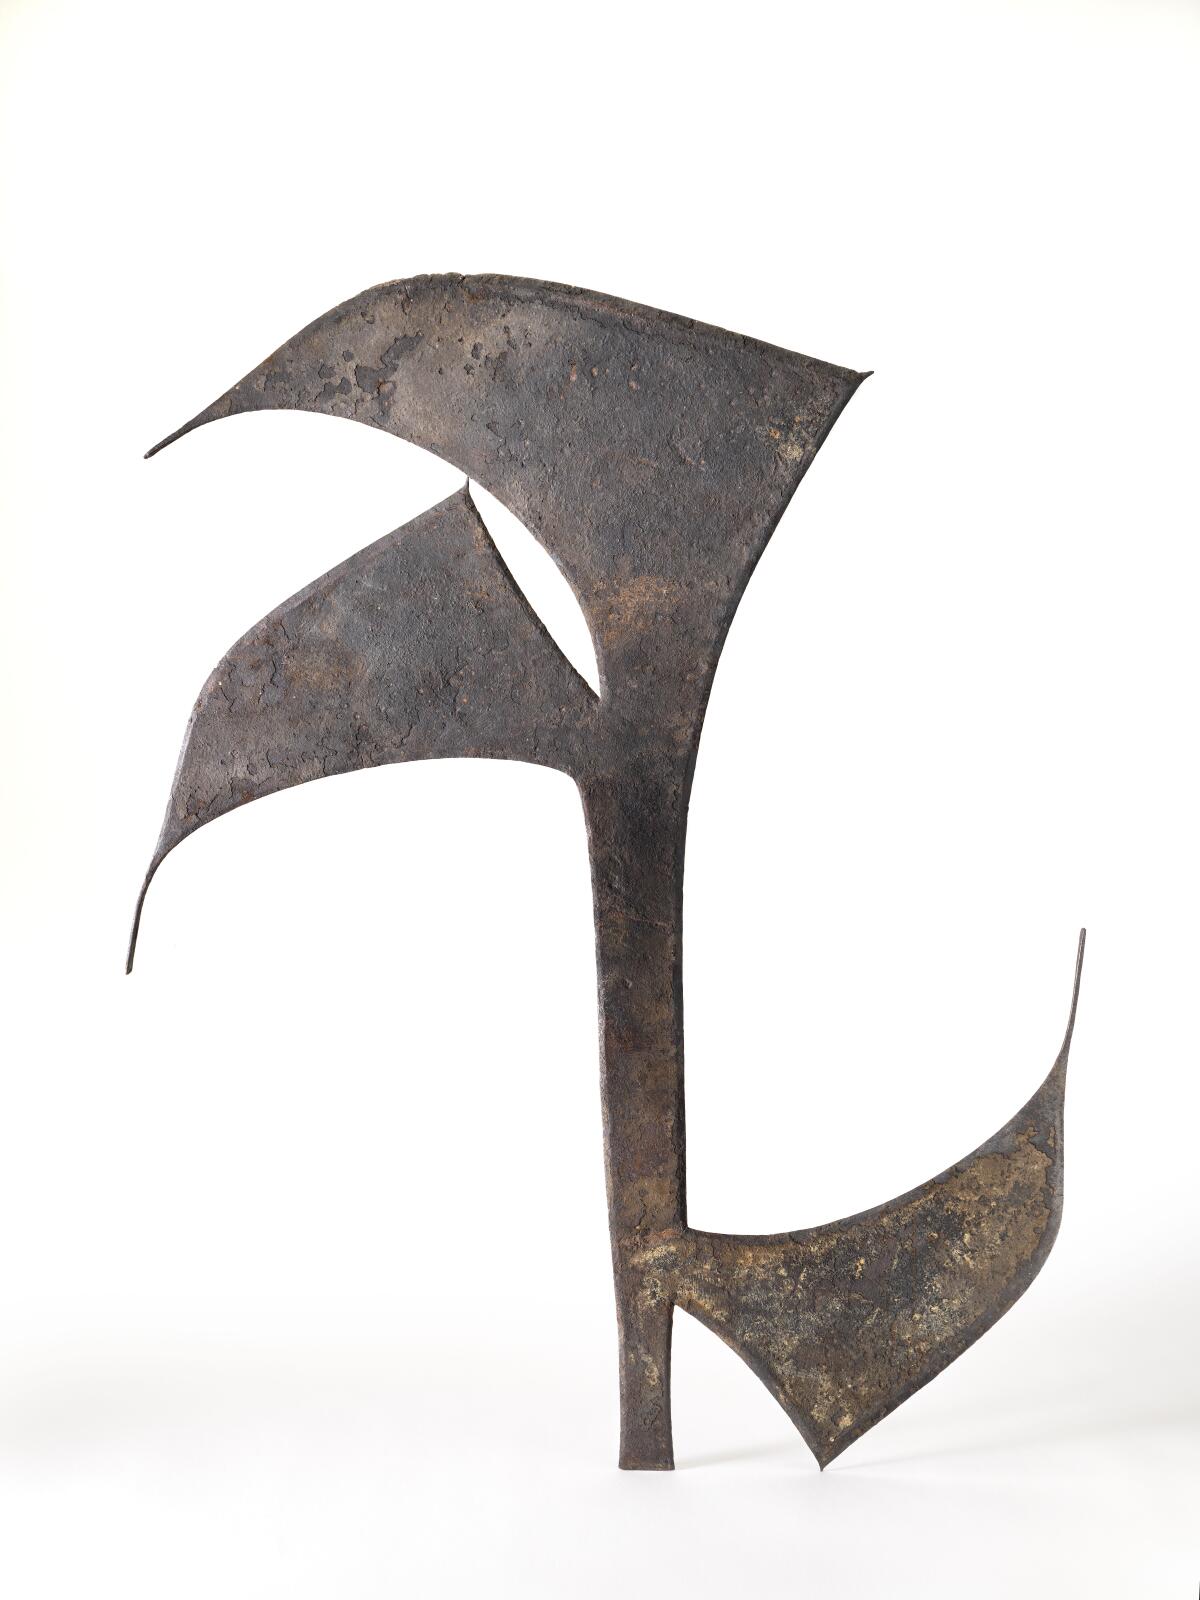 A 19th century African throwing knife is seen in profile bearing three stylized, aerodynamic blades